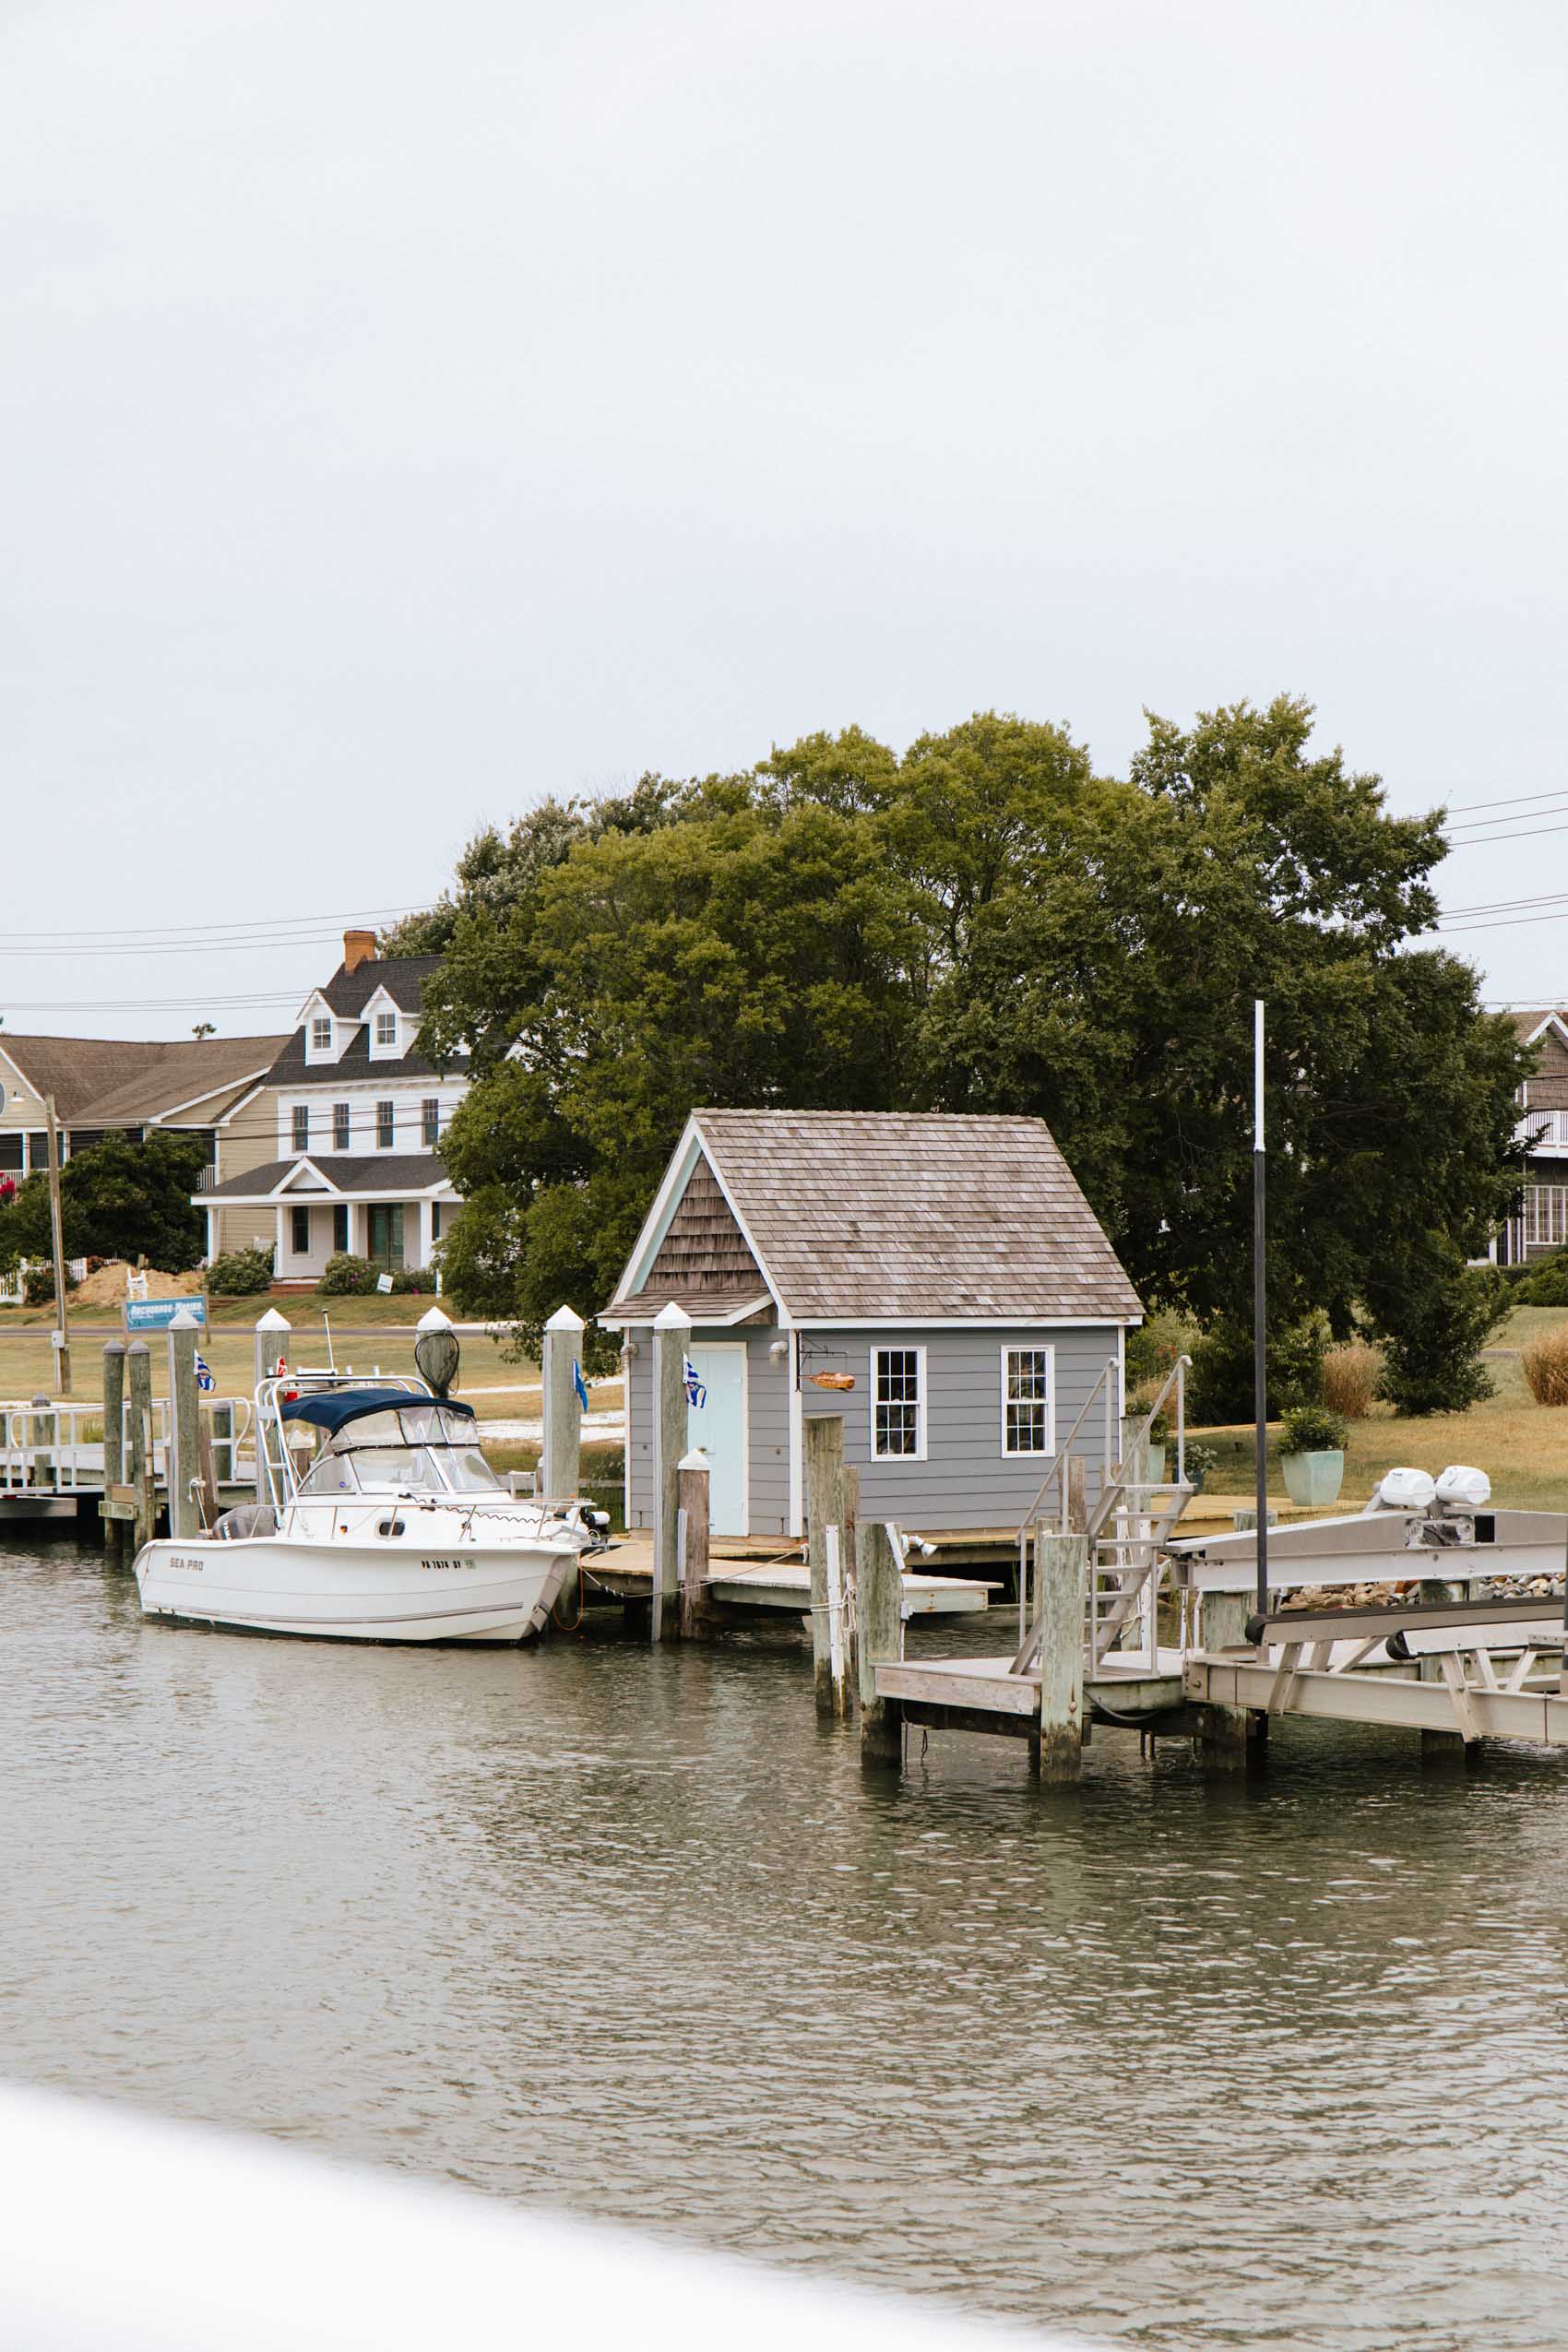 Boathouse on the Lewes and Rehoboth Canal